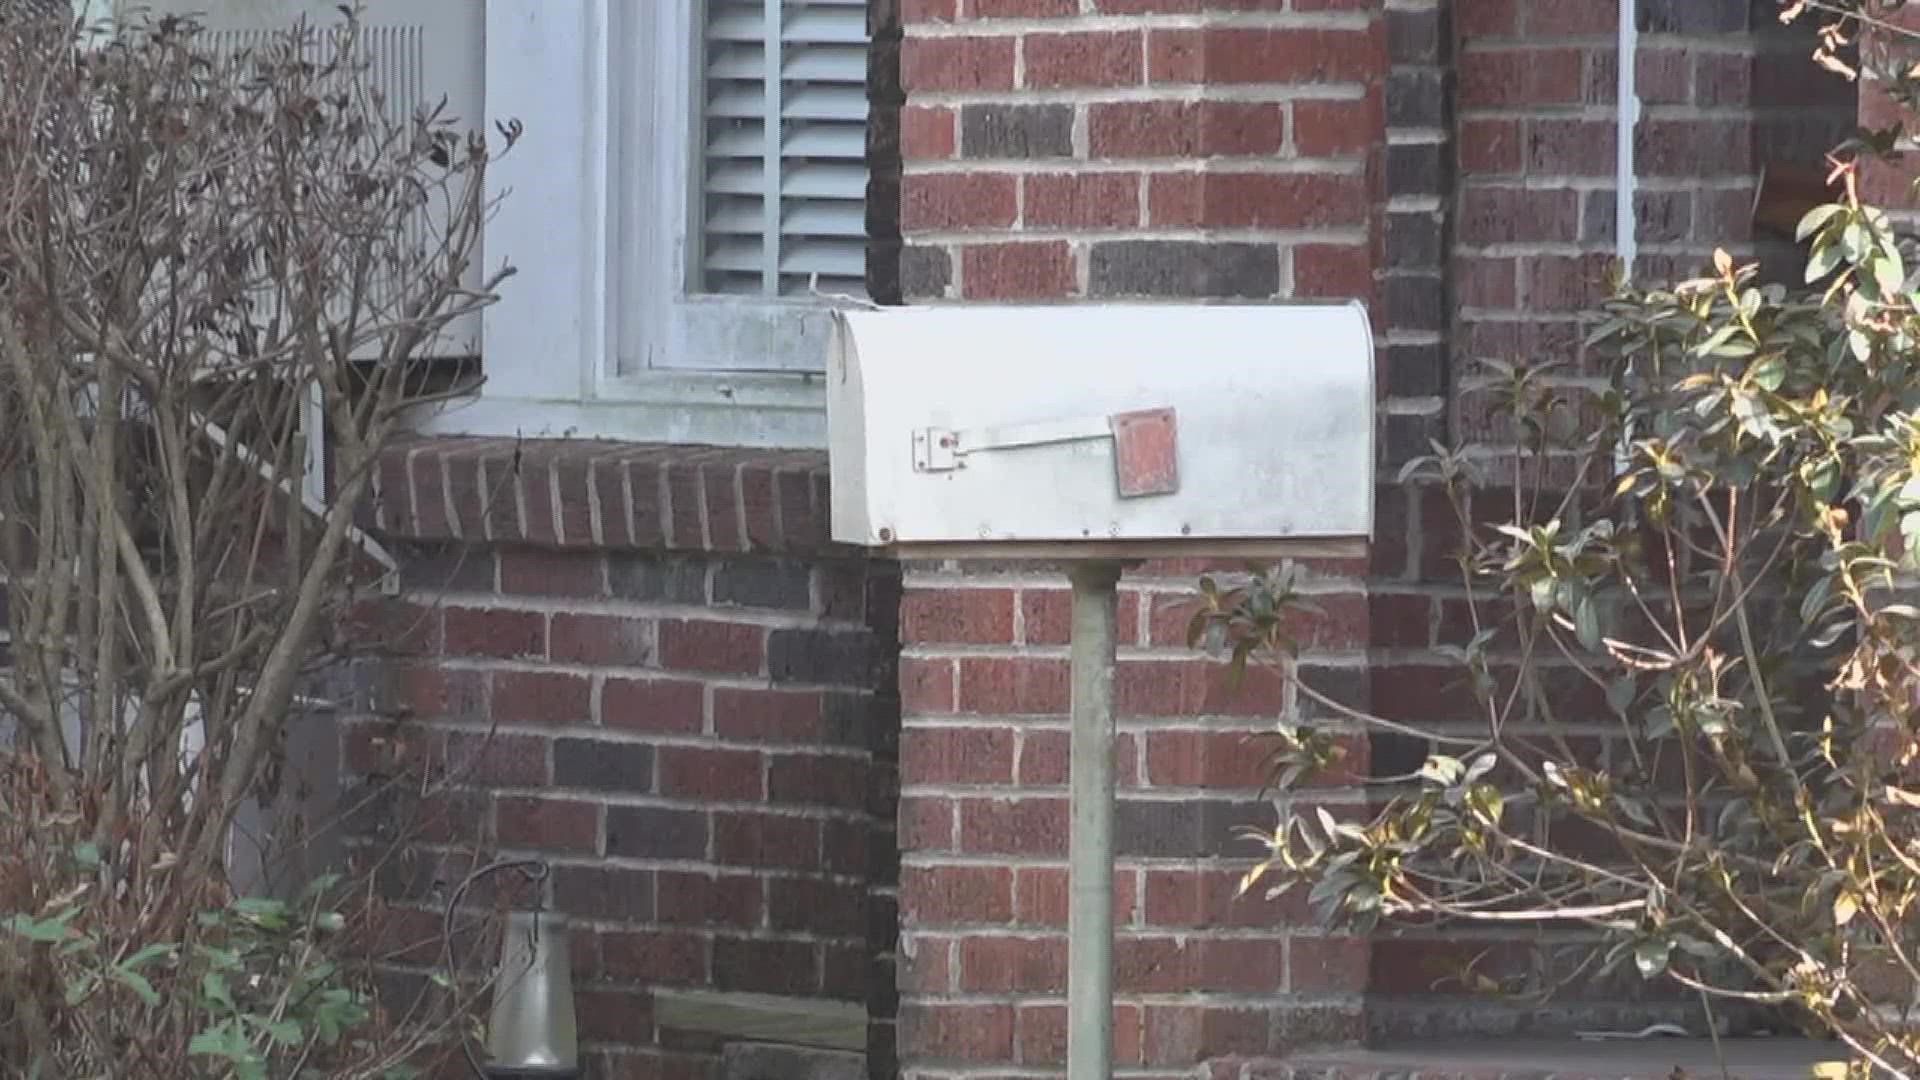 Some Southeast Texas residents are complaining about delayed or even missing mail with many saying they're worried about missing important documents like bills.